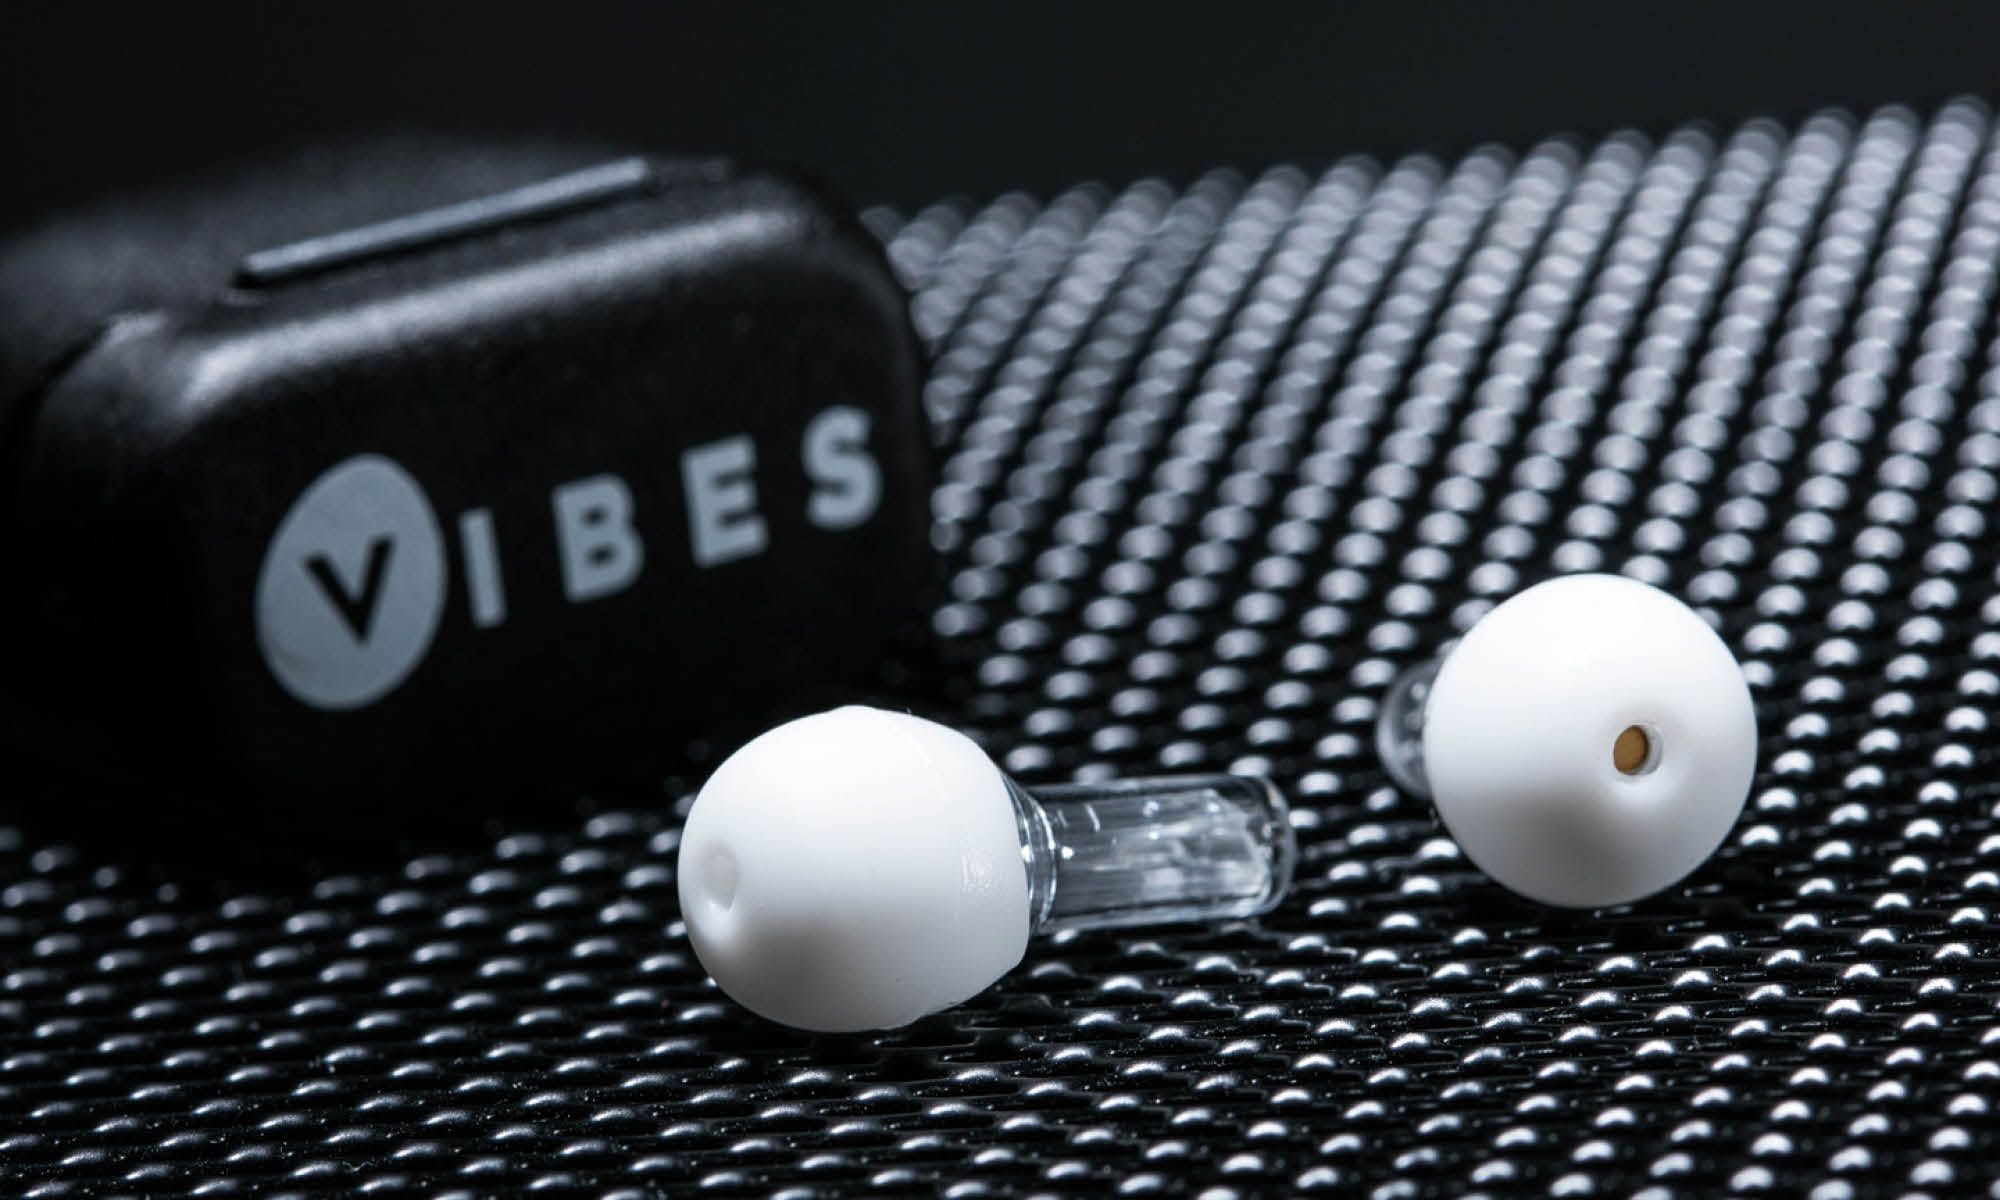 Vibes High Fidelity Earplugs Review: Solid, Unique-Looking Concert Earplugs